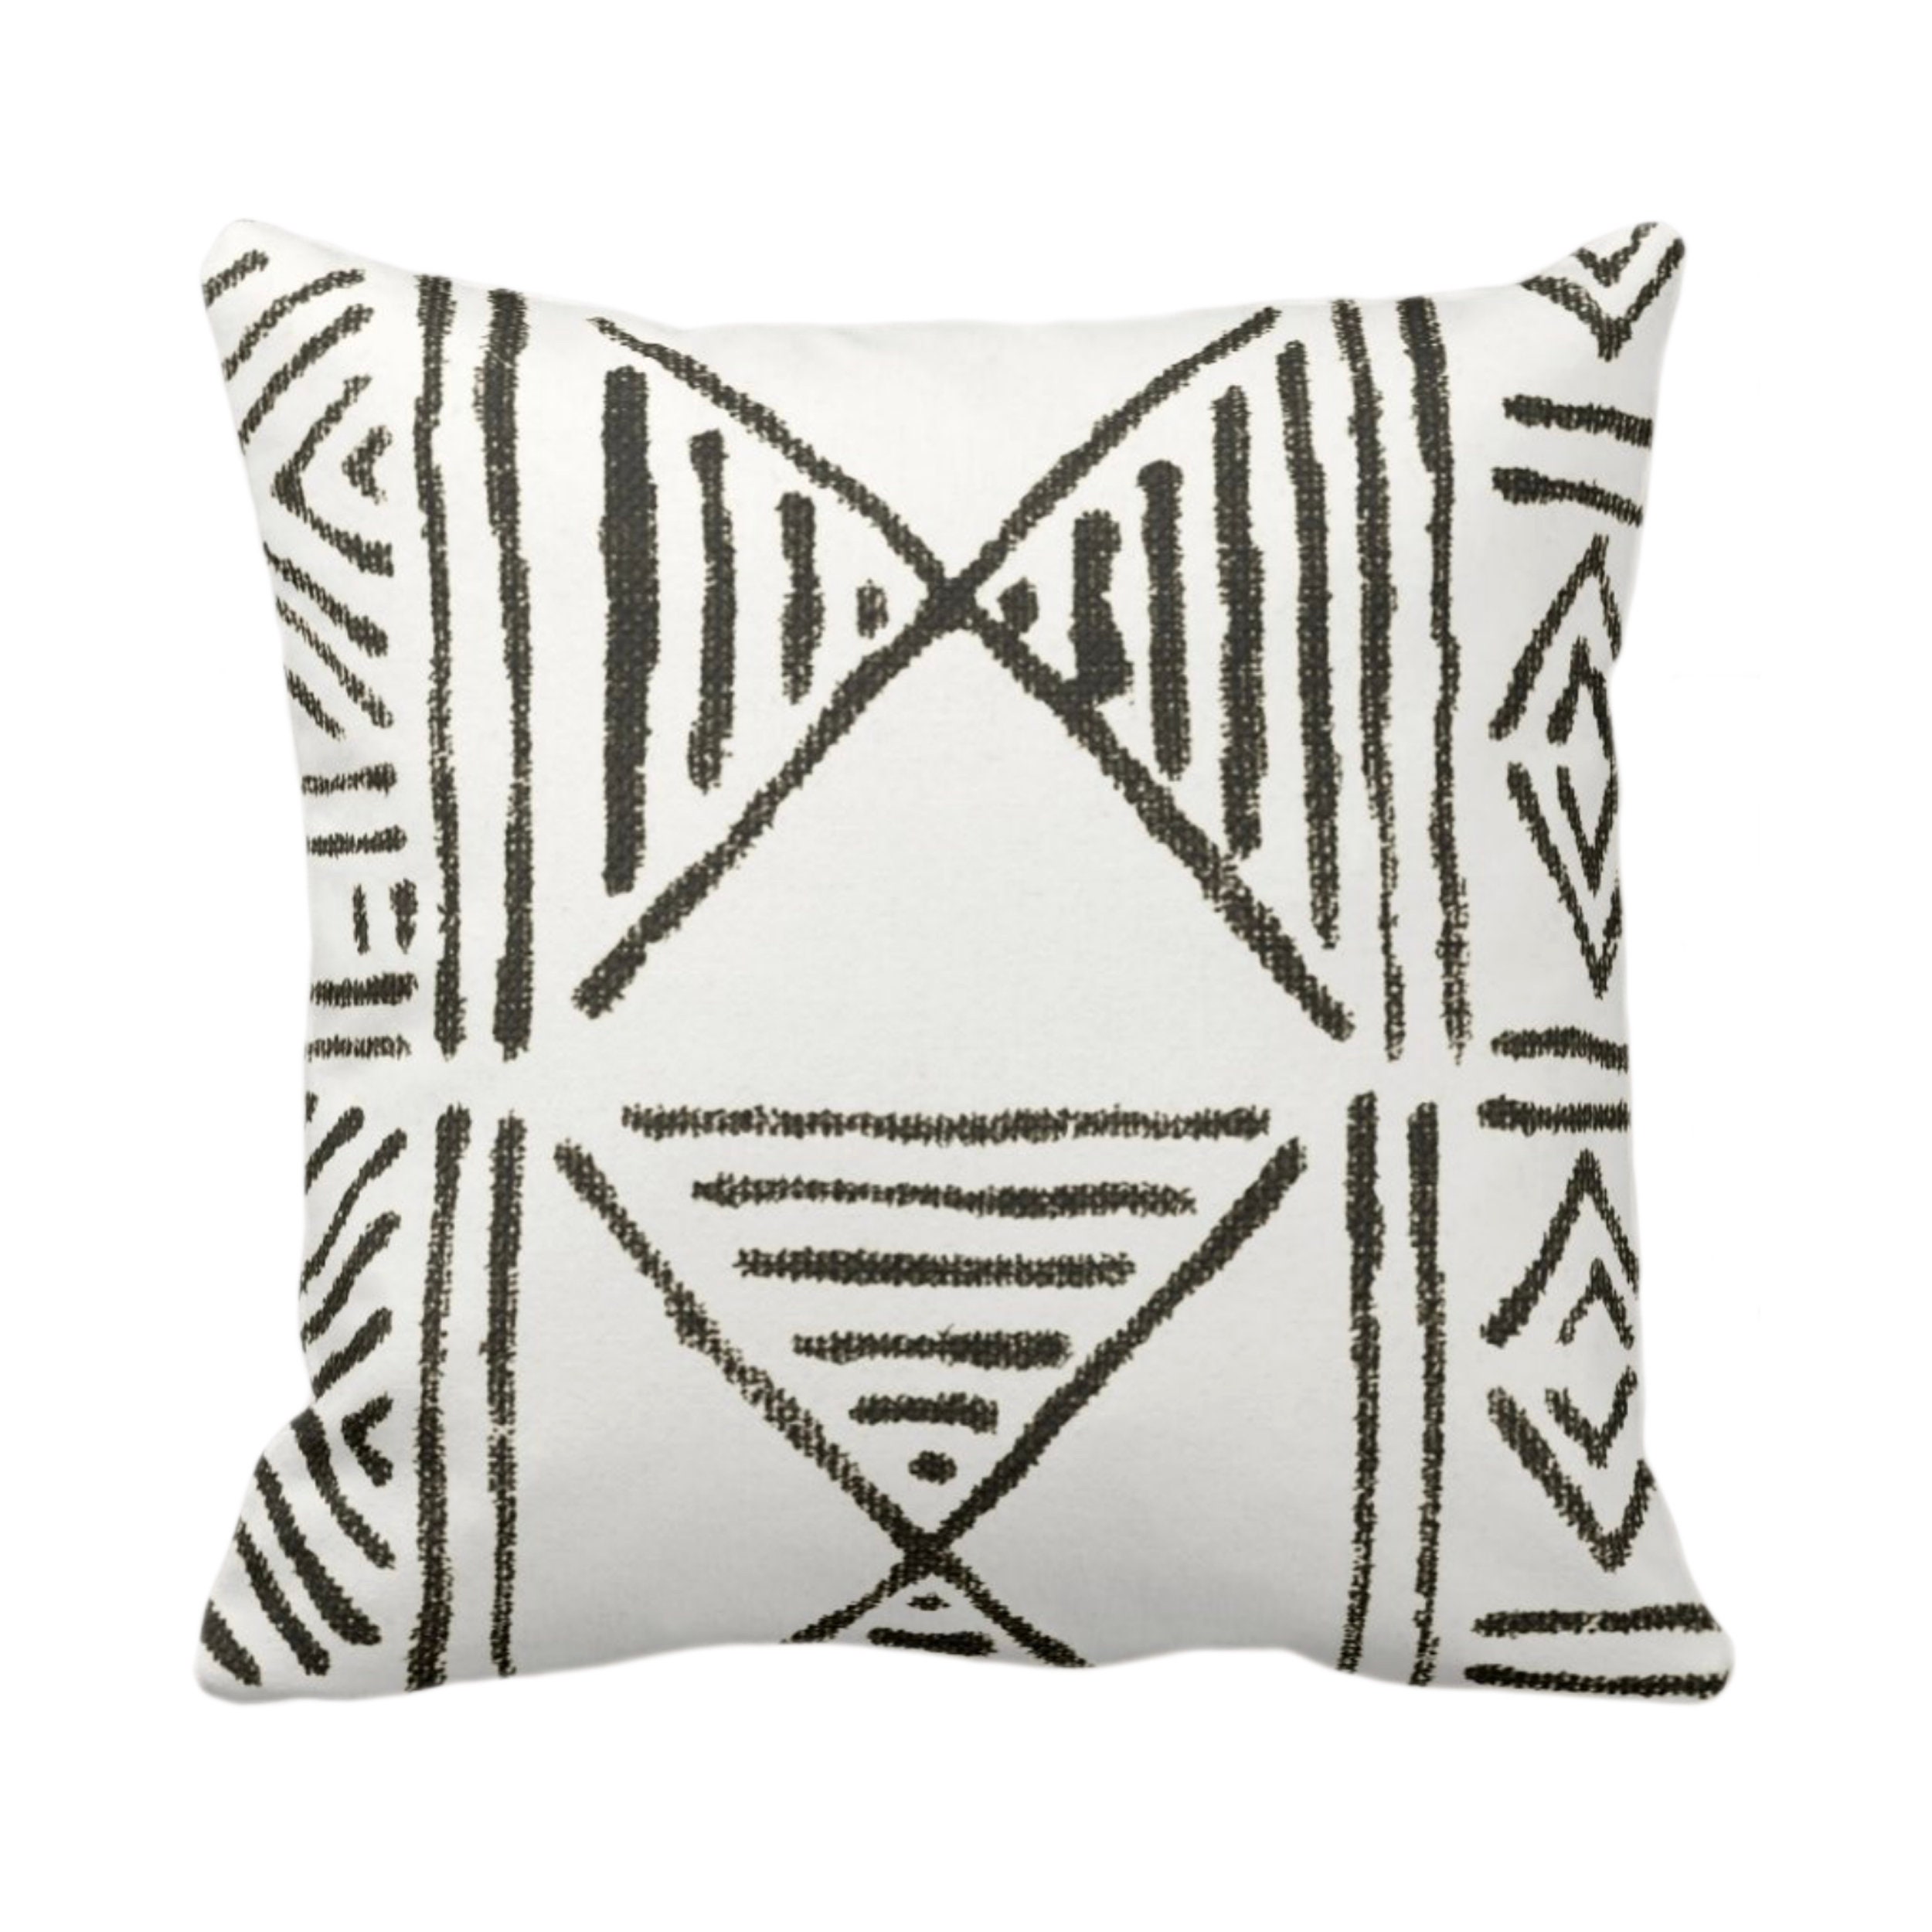 Authentic African Mud Cloth Ivory Mud Cloth Pillow Cover Mudcloth Pillow Cover Solid Mudcloth Throw Pillow